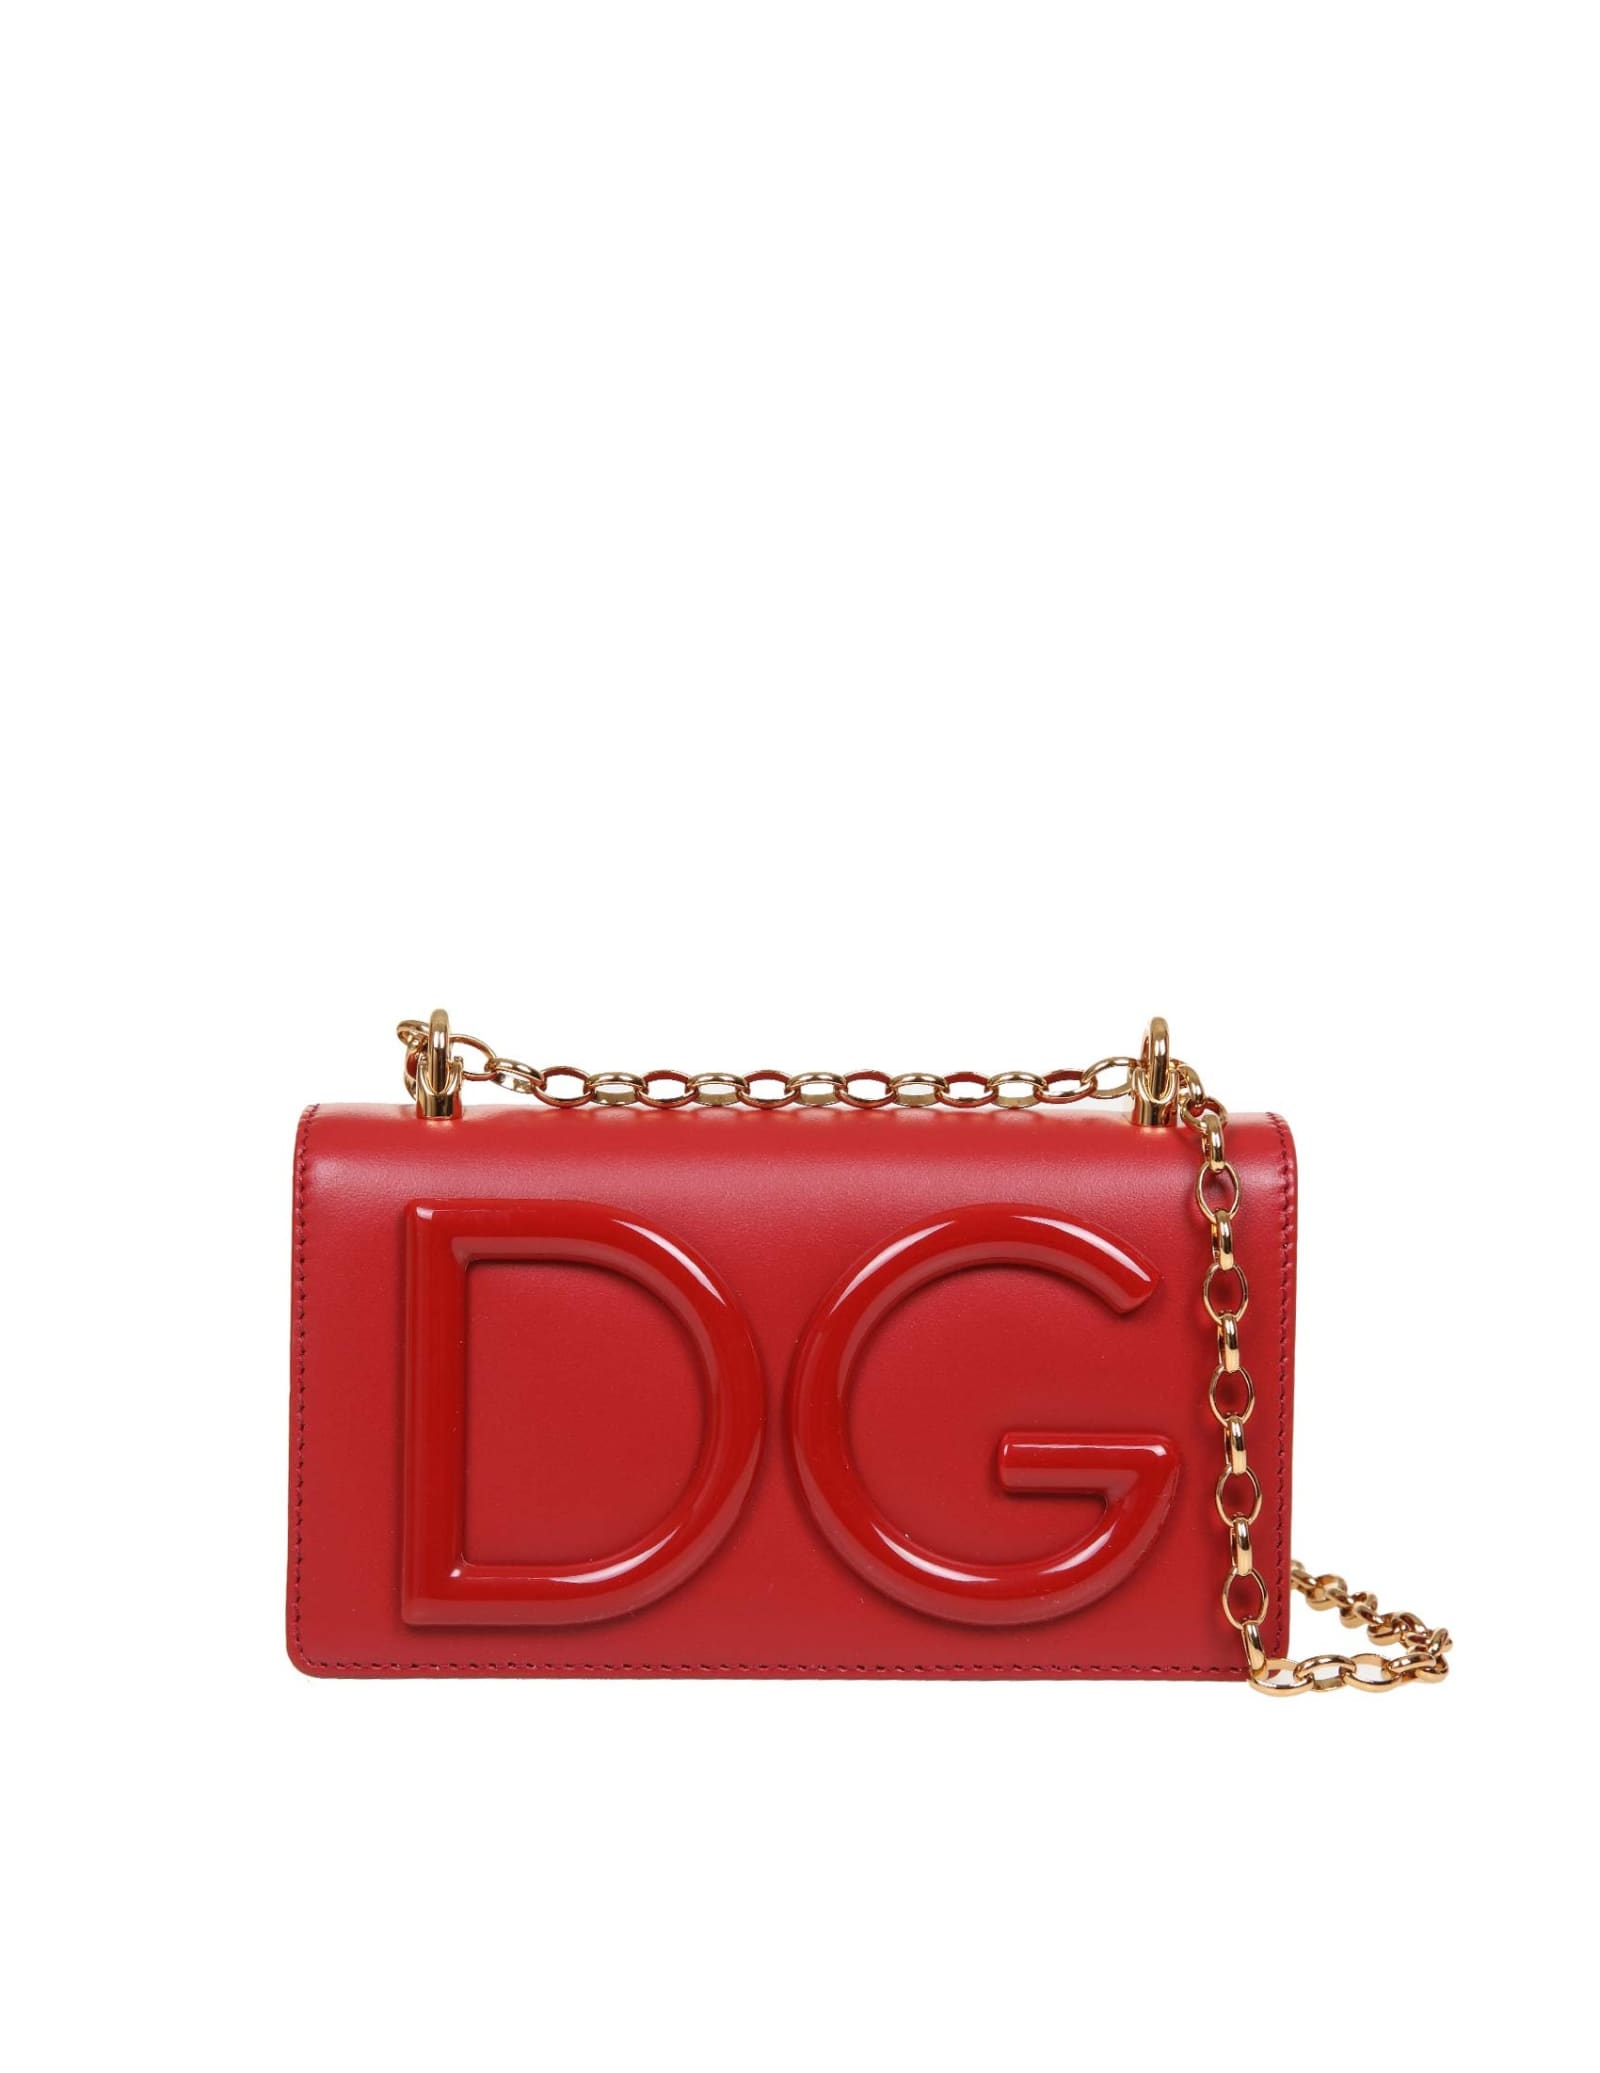 Dolce & Gabbana Phone Cover In Red Leather